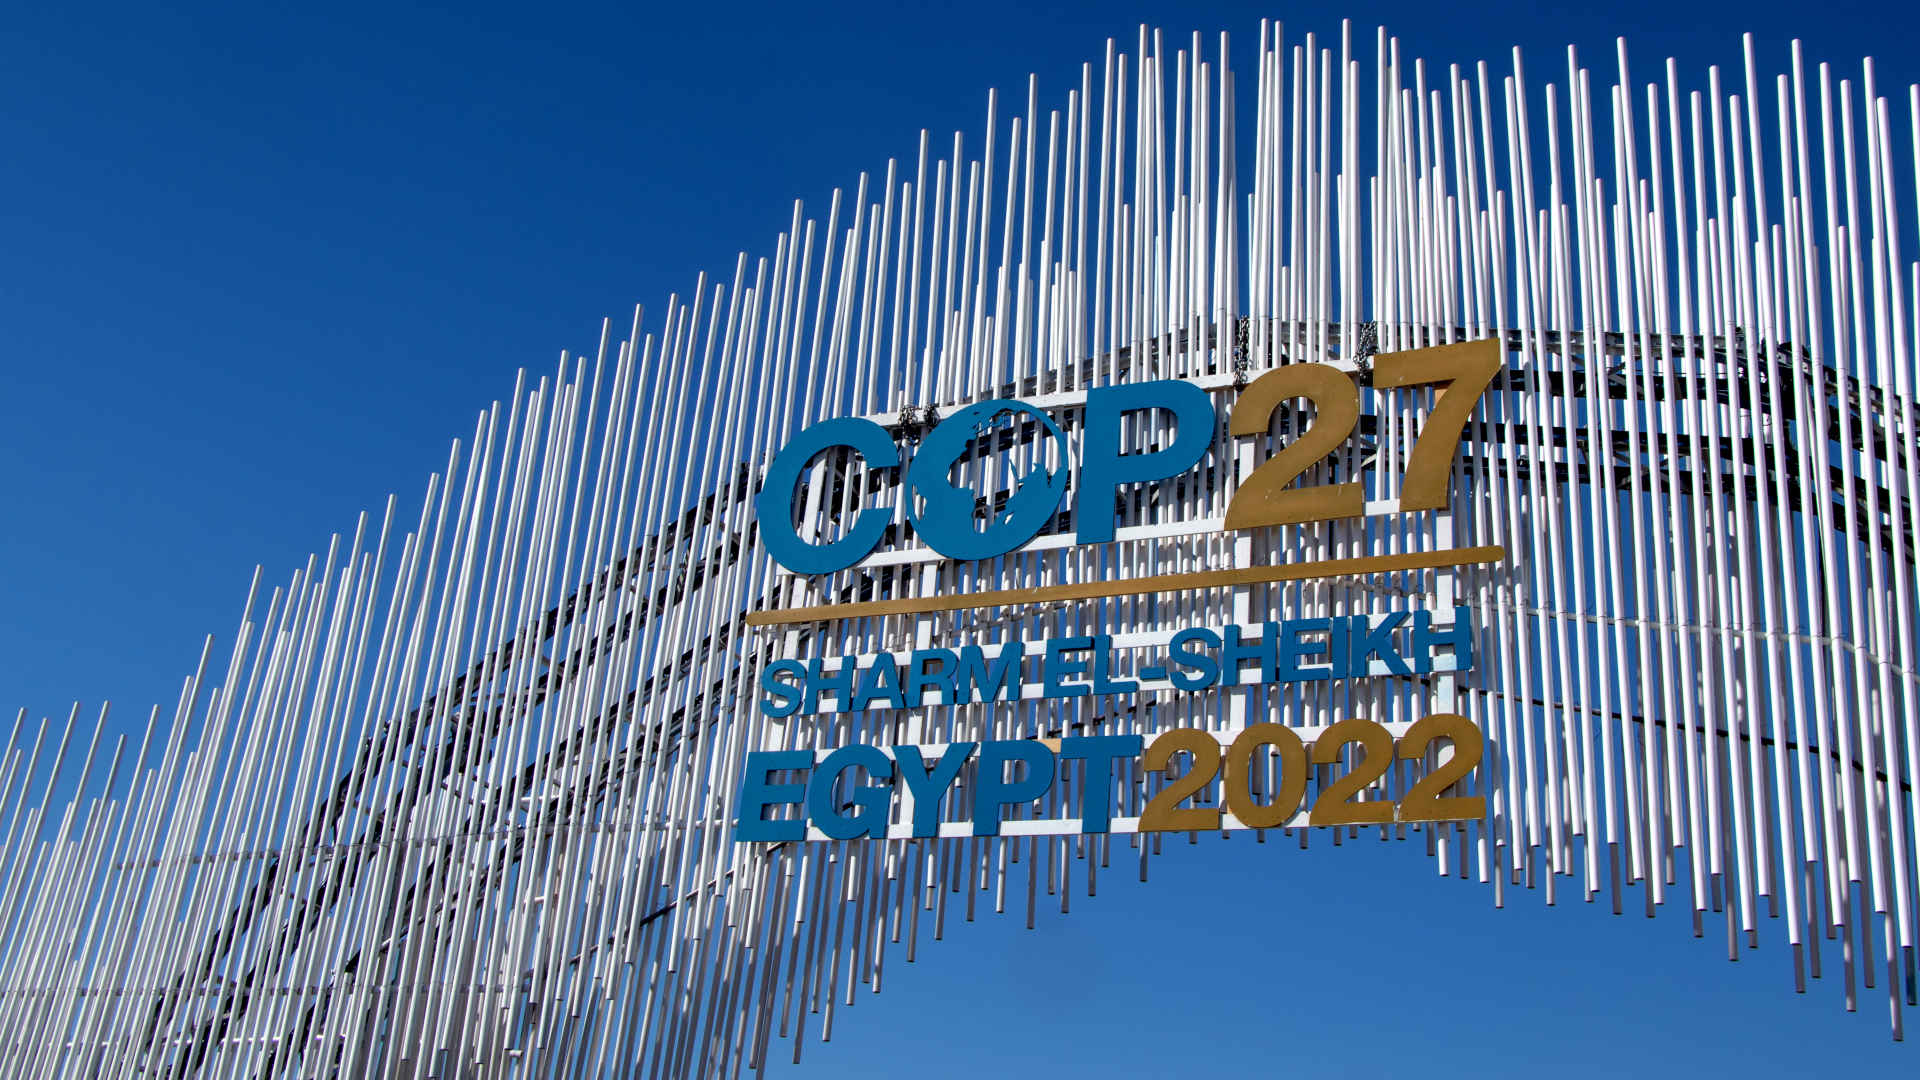 The main gate of the Sharm El-Sheikh Climate Change Conference (COP 27)